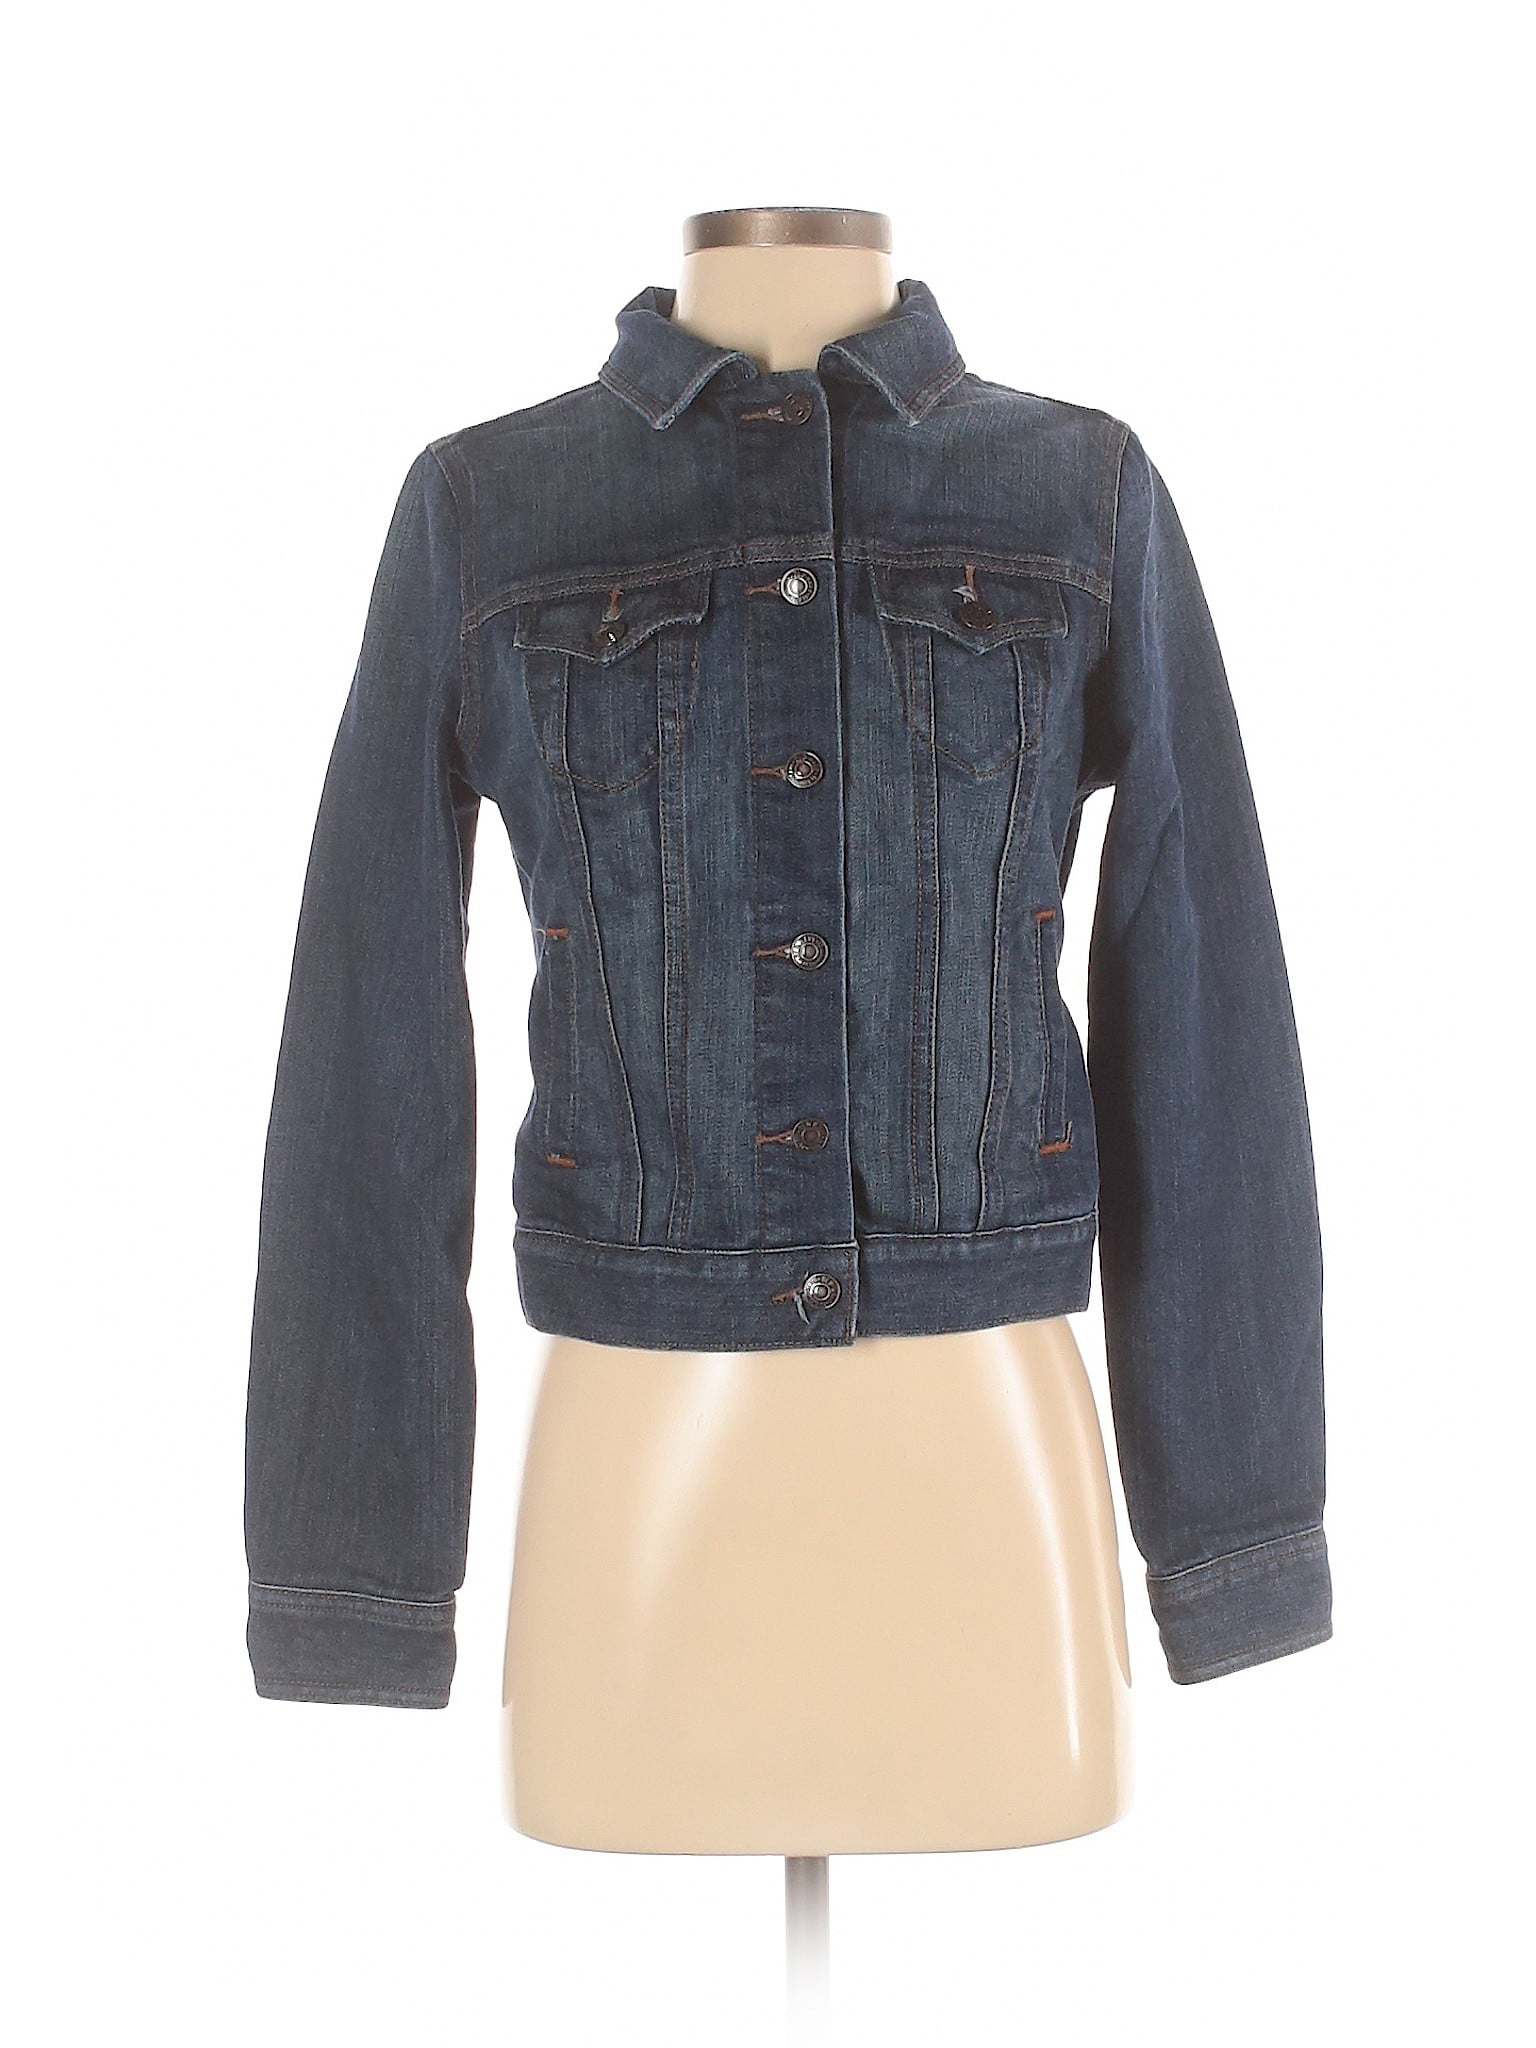 Old Navy - Pre-Owned Old Navy Women's Size S Petite Denim Jacket ...